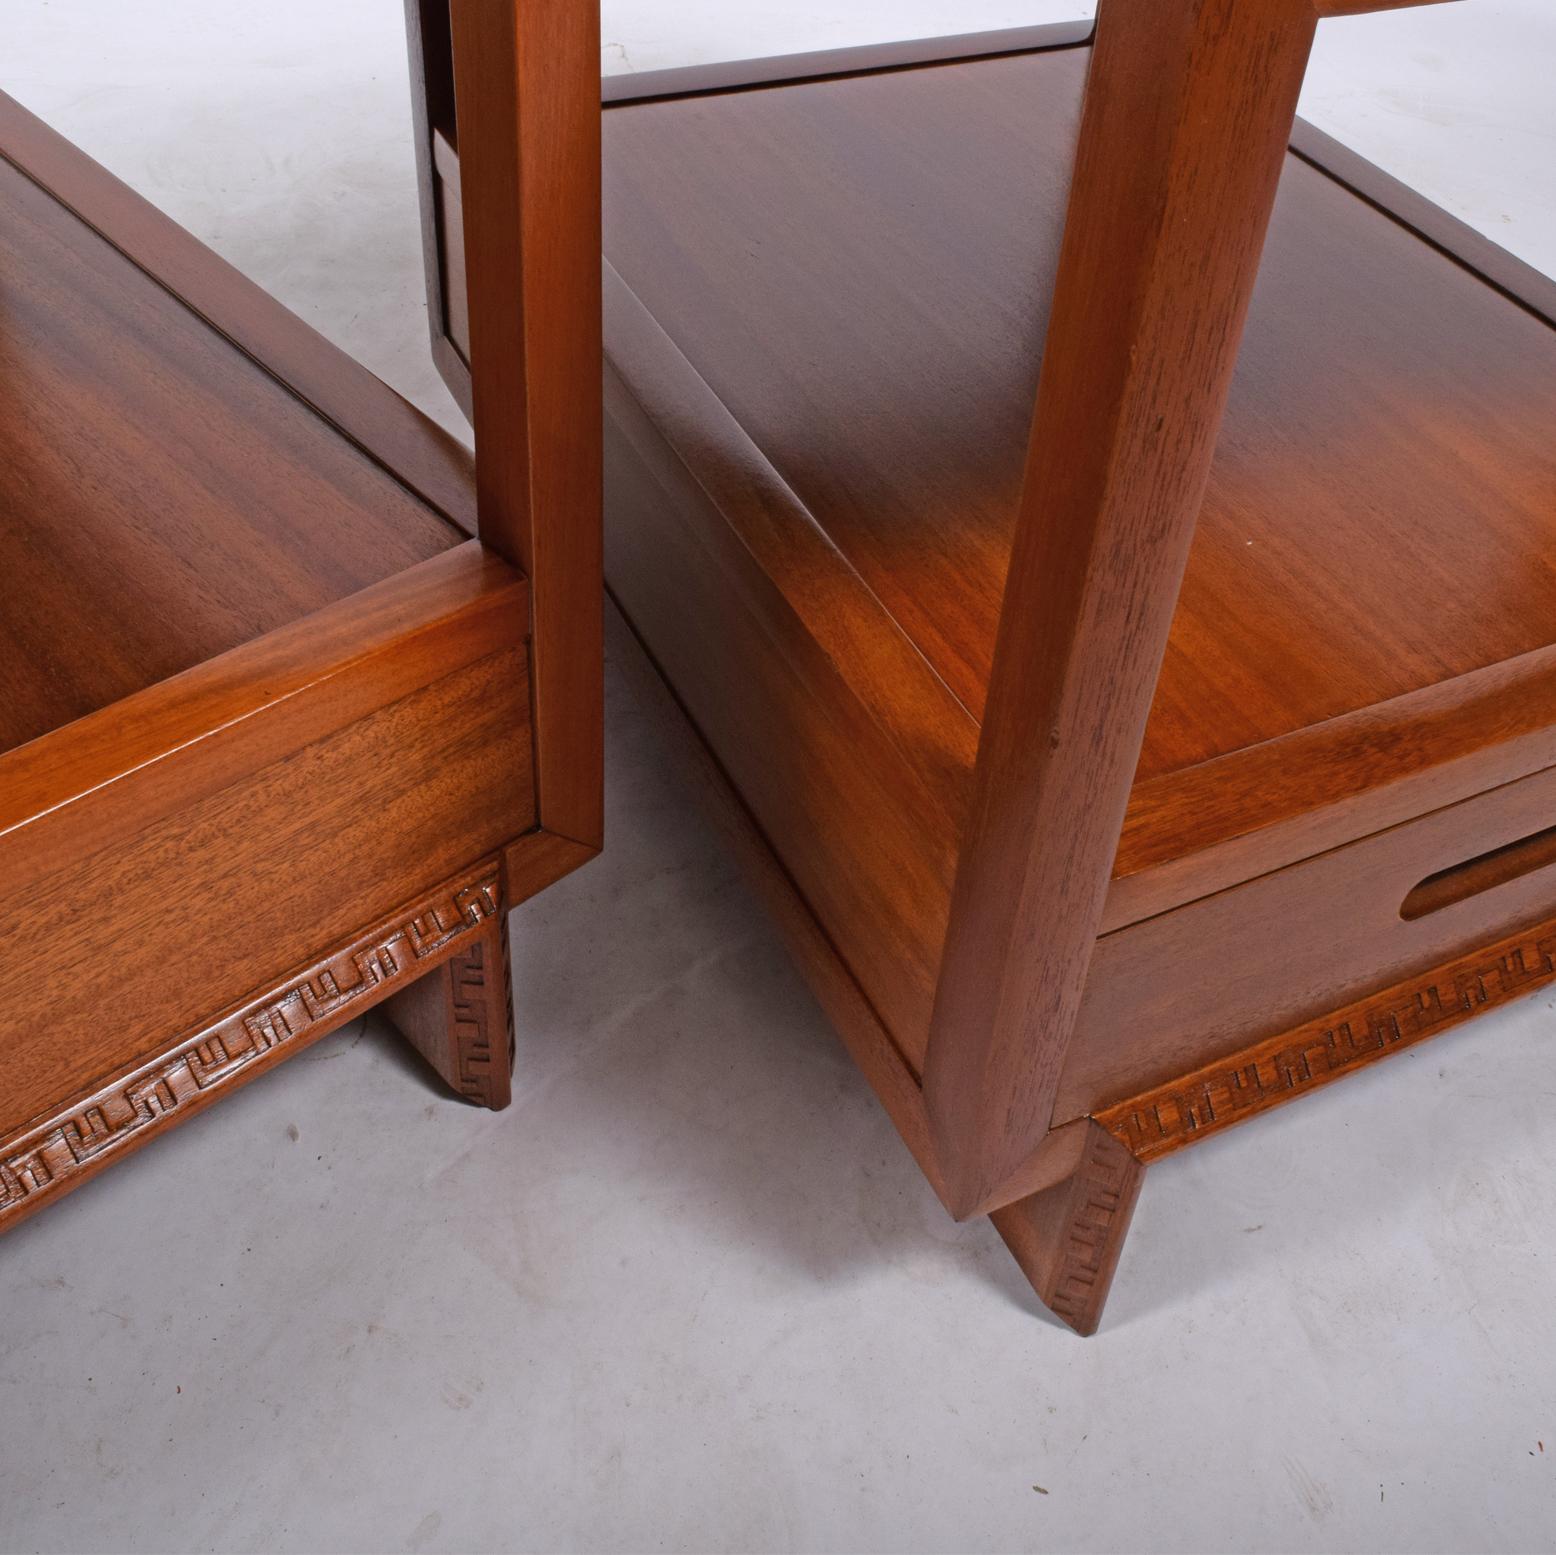 Mahogany Pair of Nightstands/Side Tables by Frank Lloyd Wright for Heritage Henredon